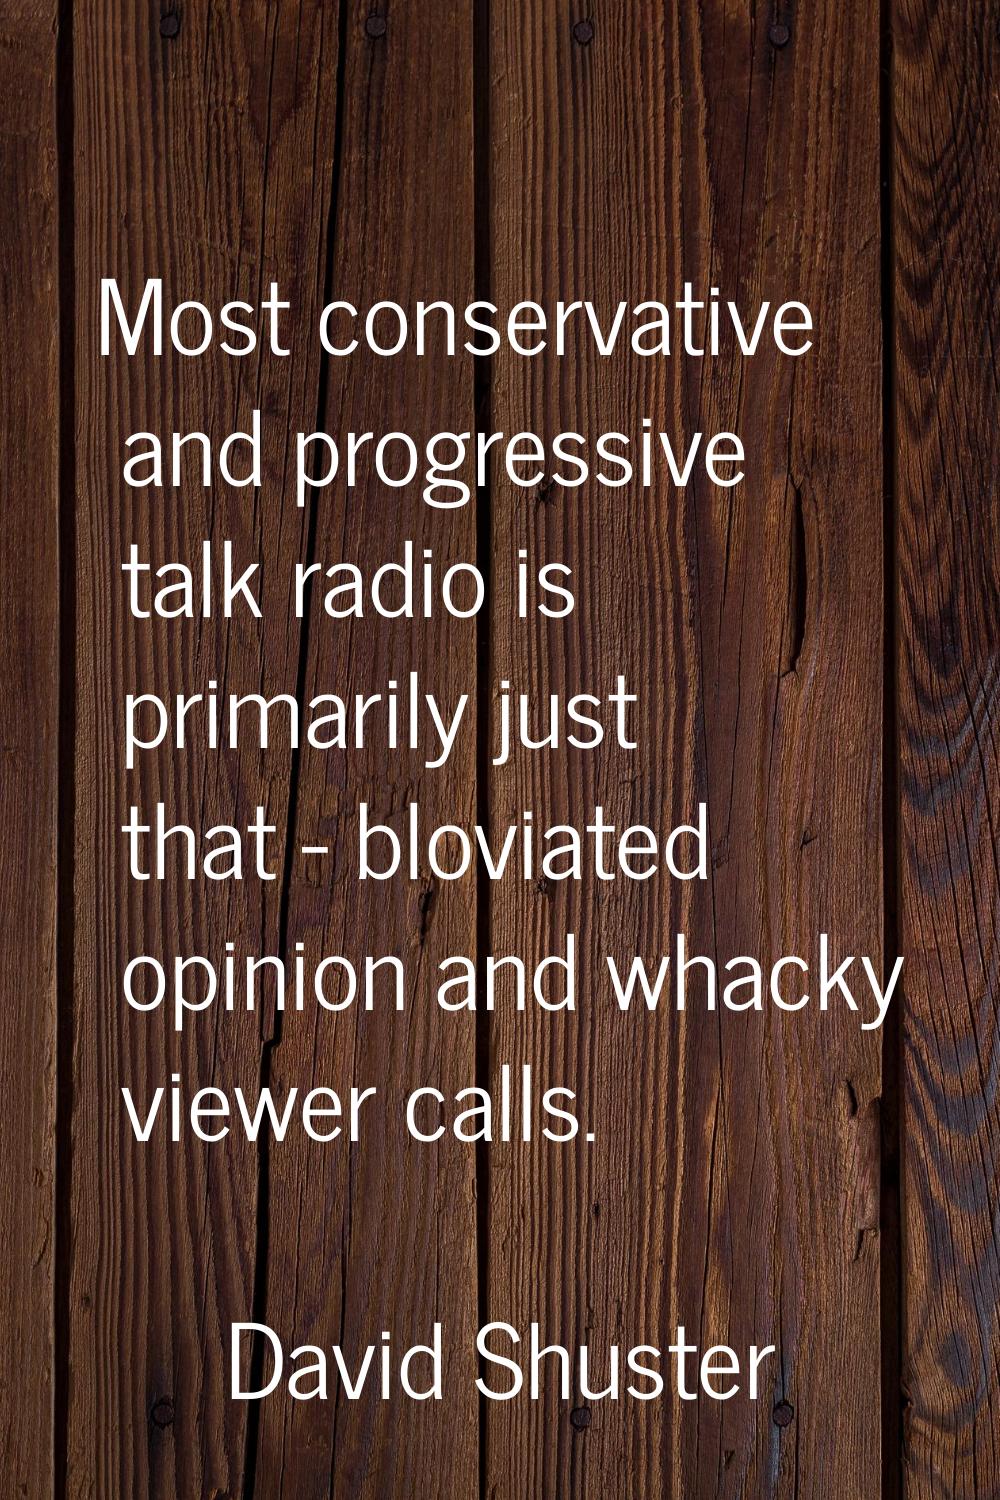 Most conservative and progressive talk radio is primarily just that - bloviated opinion and whacky 